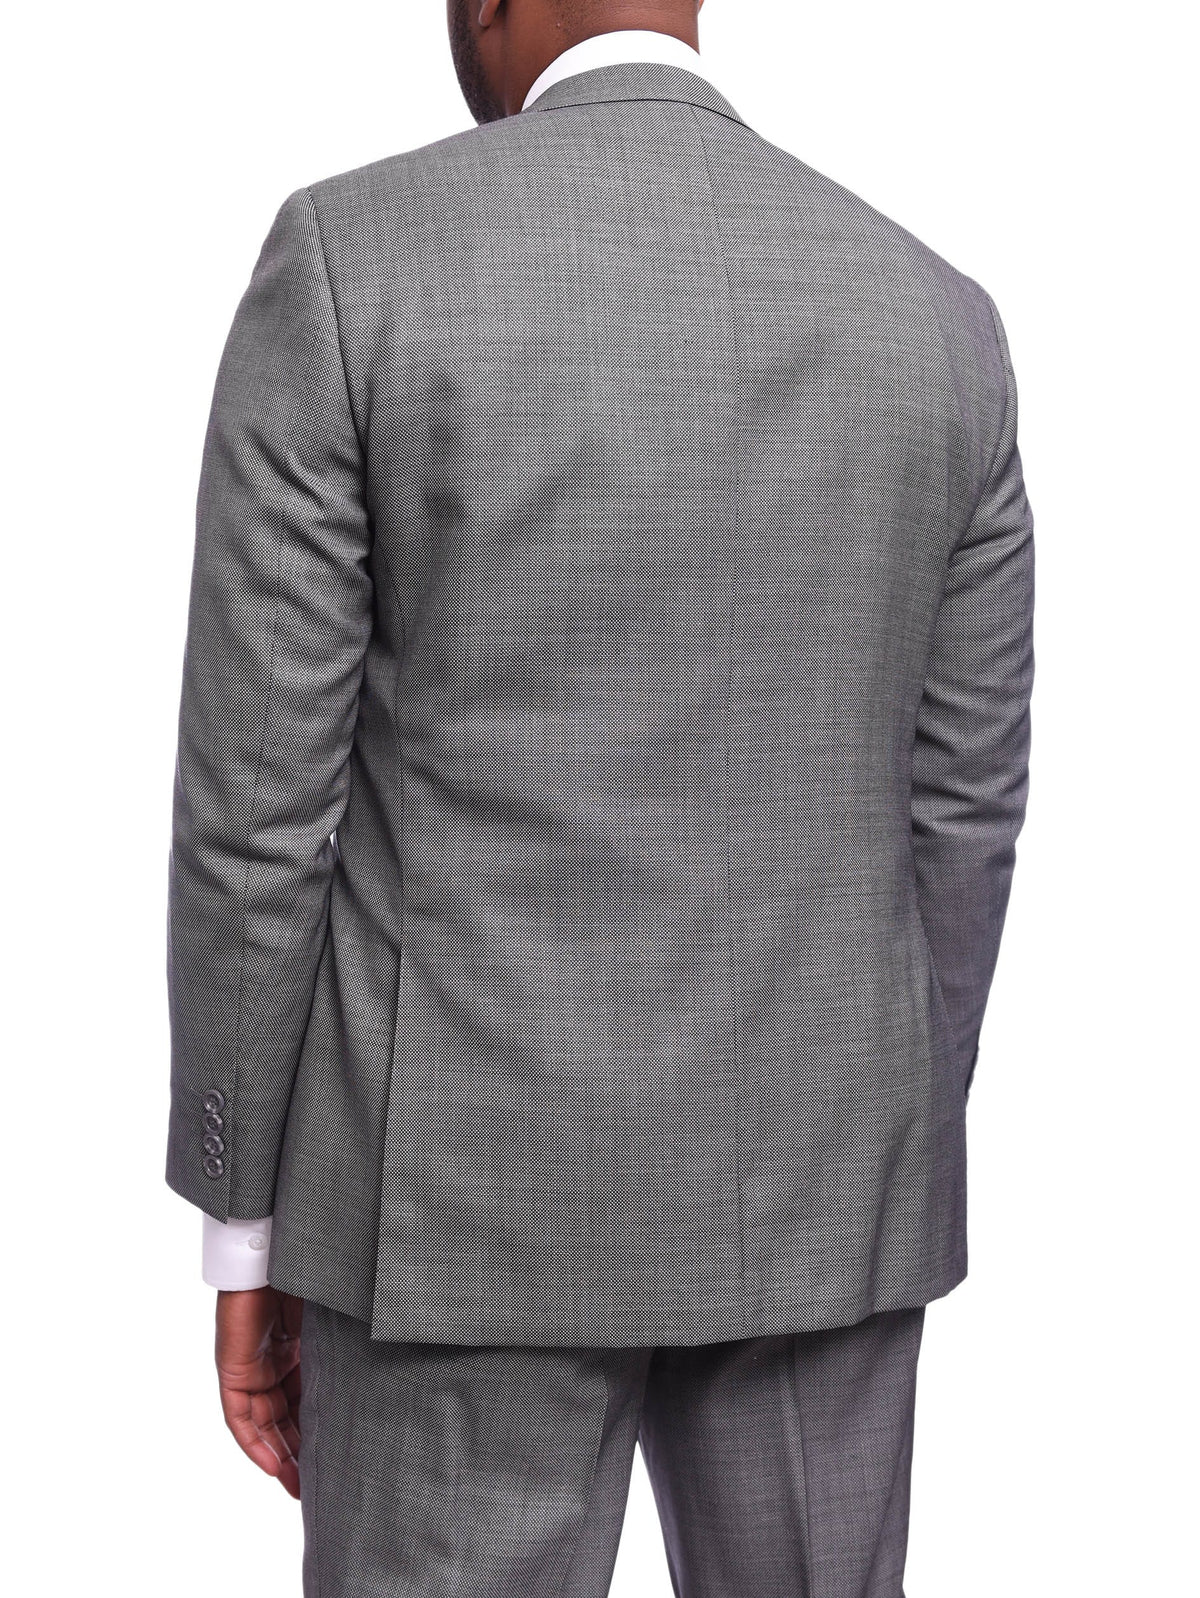 Napoli TWO PIECE SUITS Napoli Classic Fit Gray Birdseye Two Button Half Canvassed Wool Silk Blend Suit